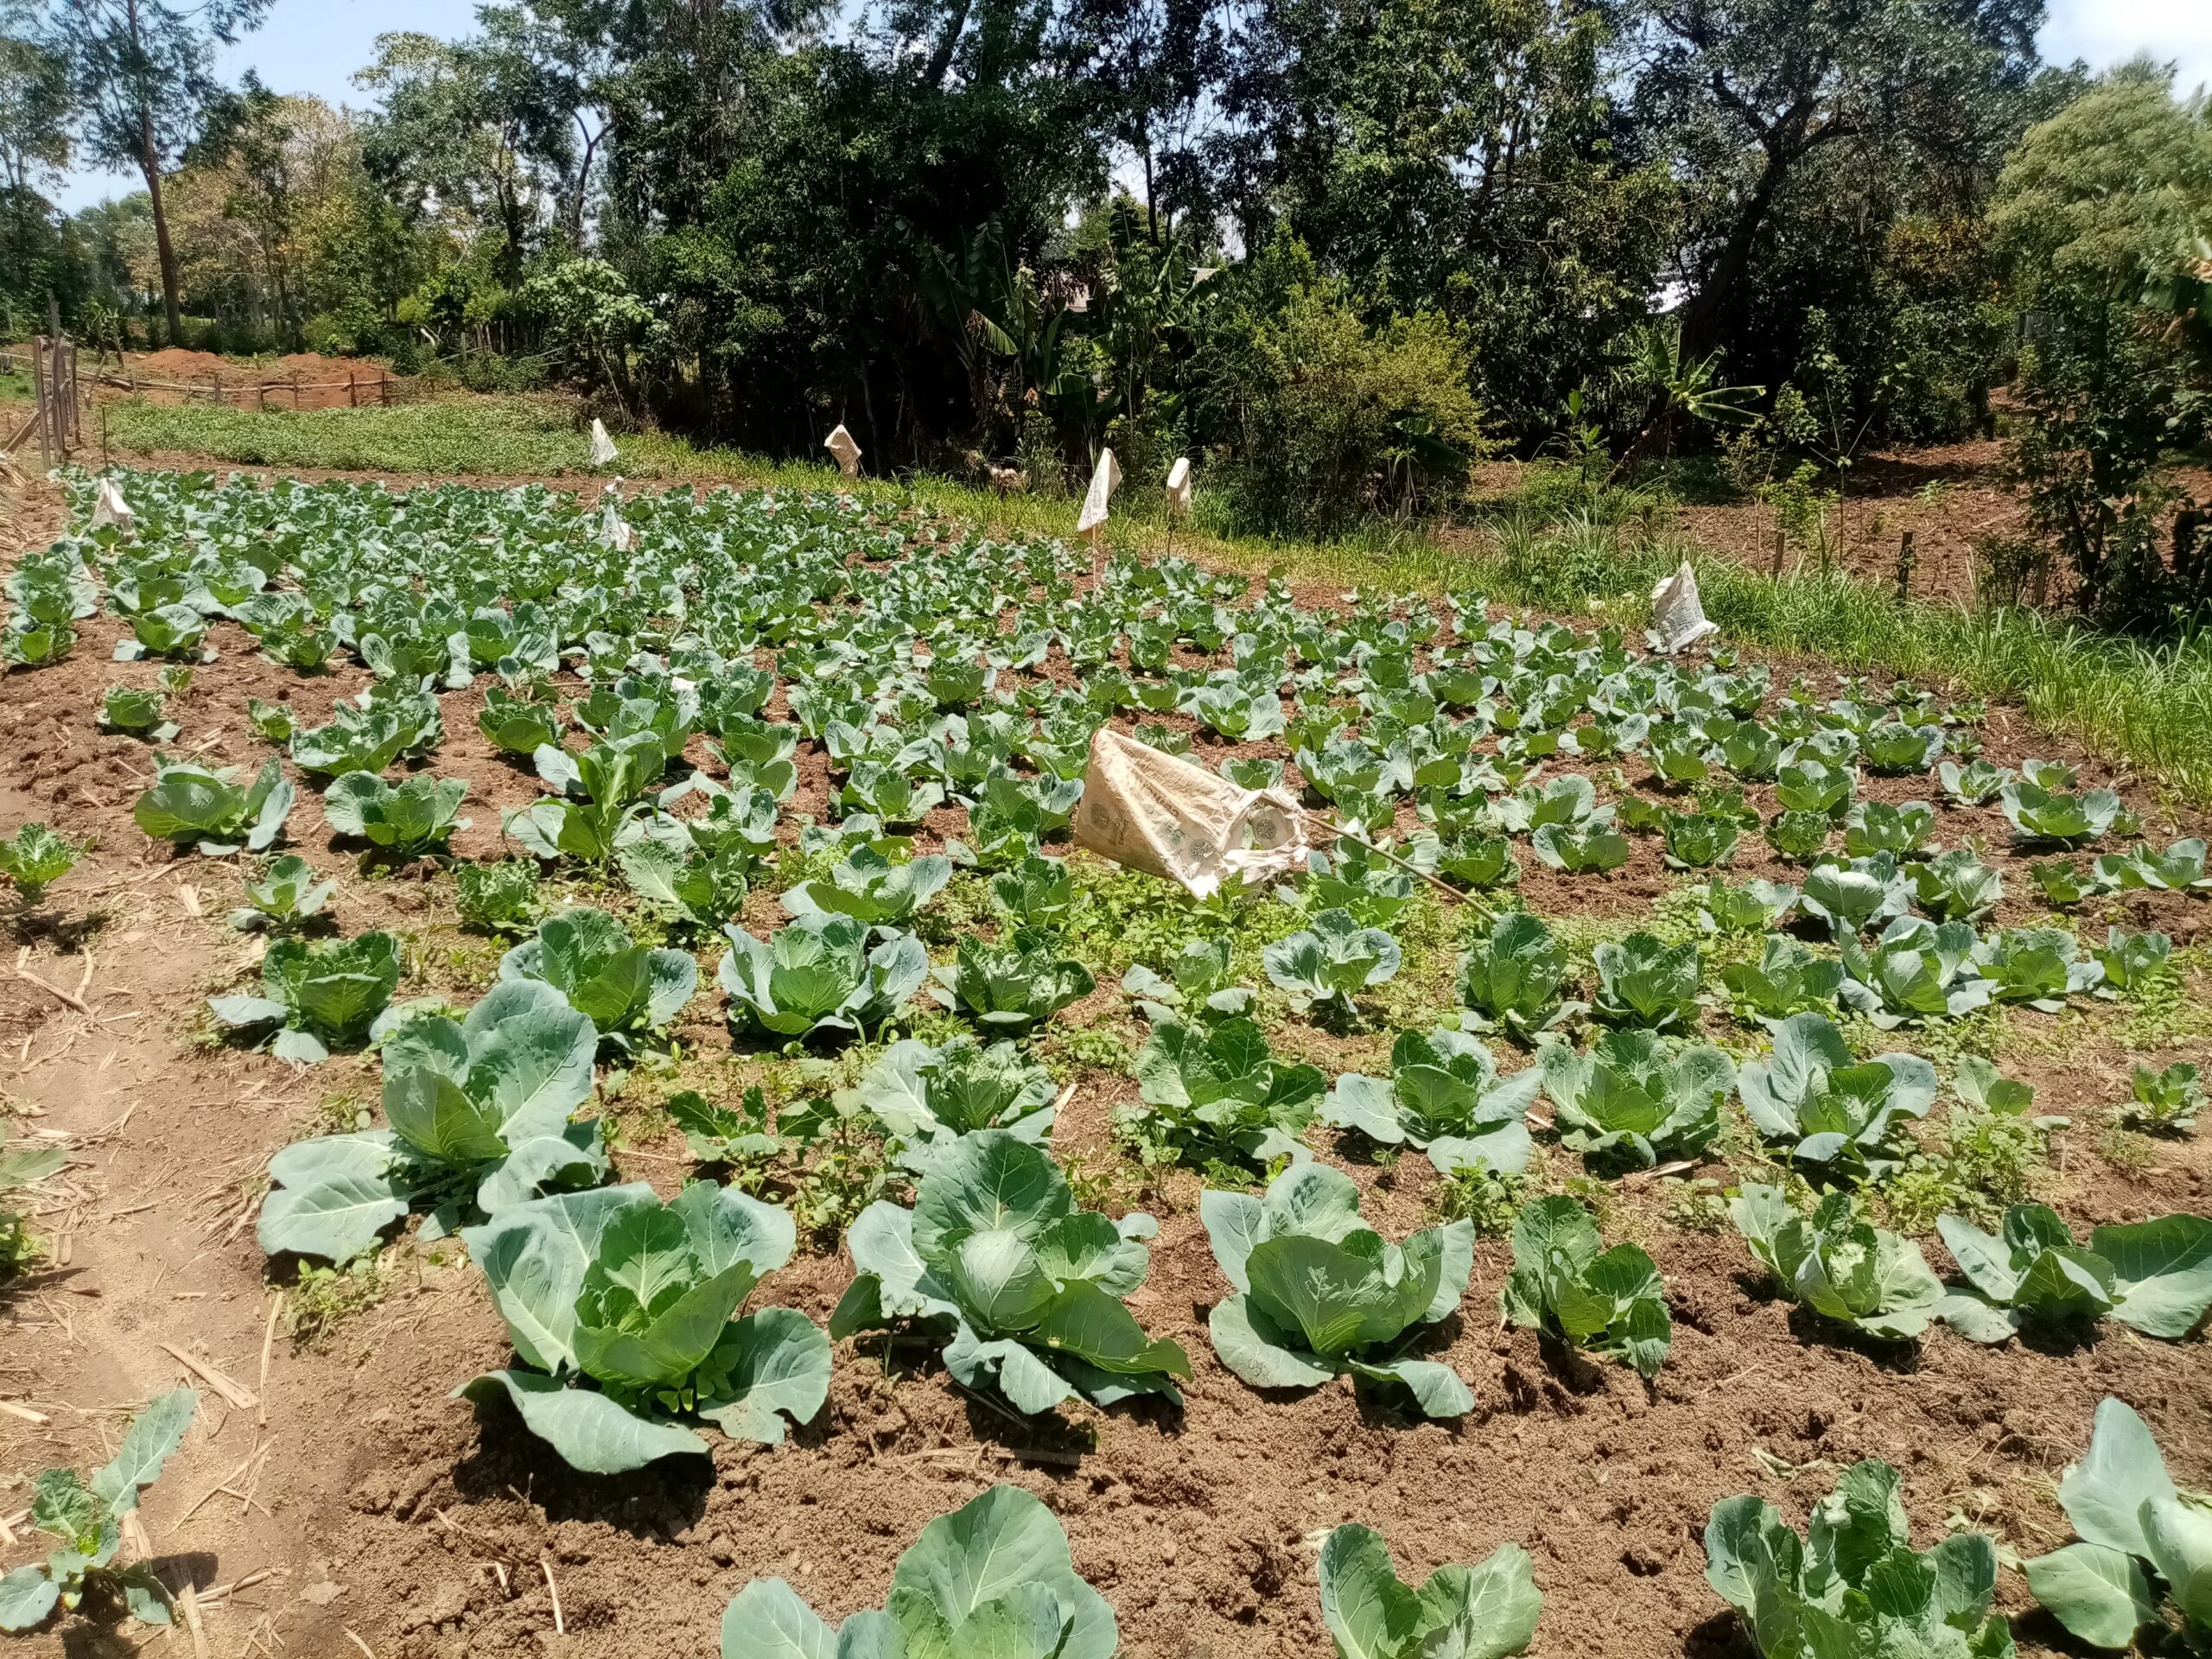 Cabbages in a farm